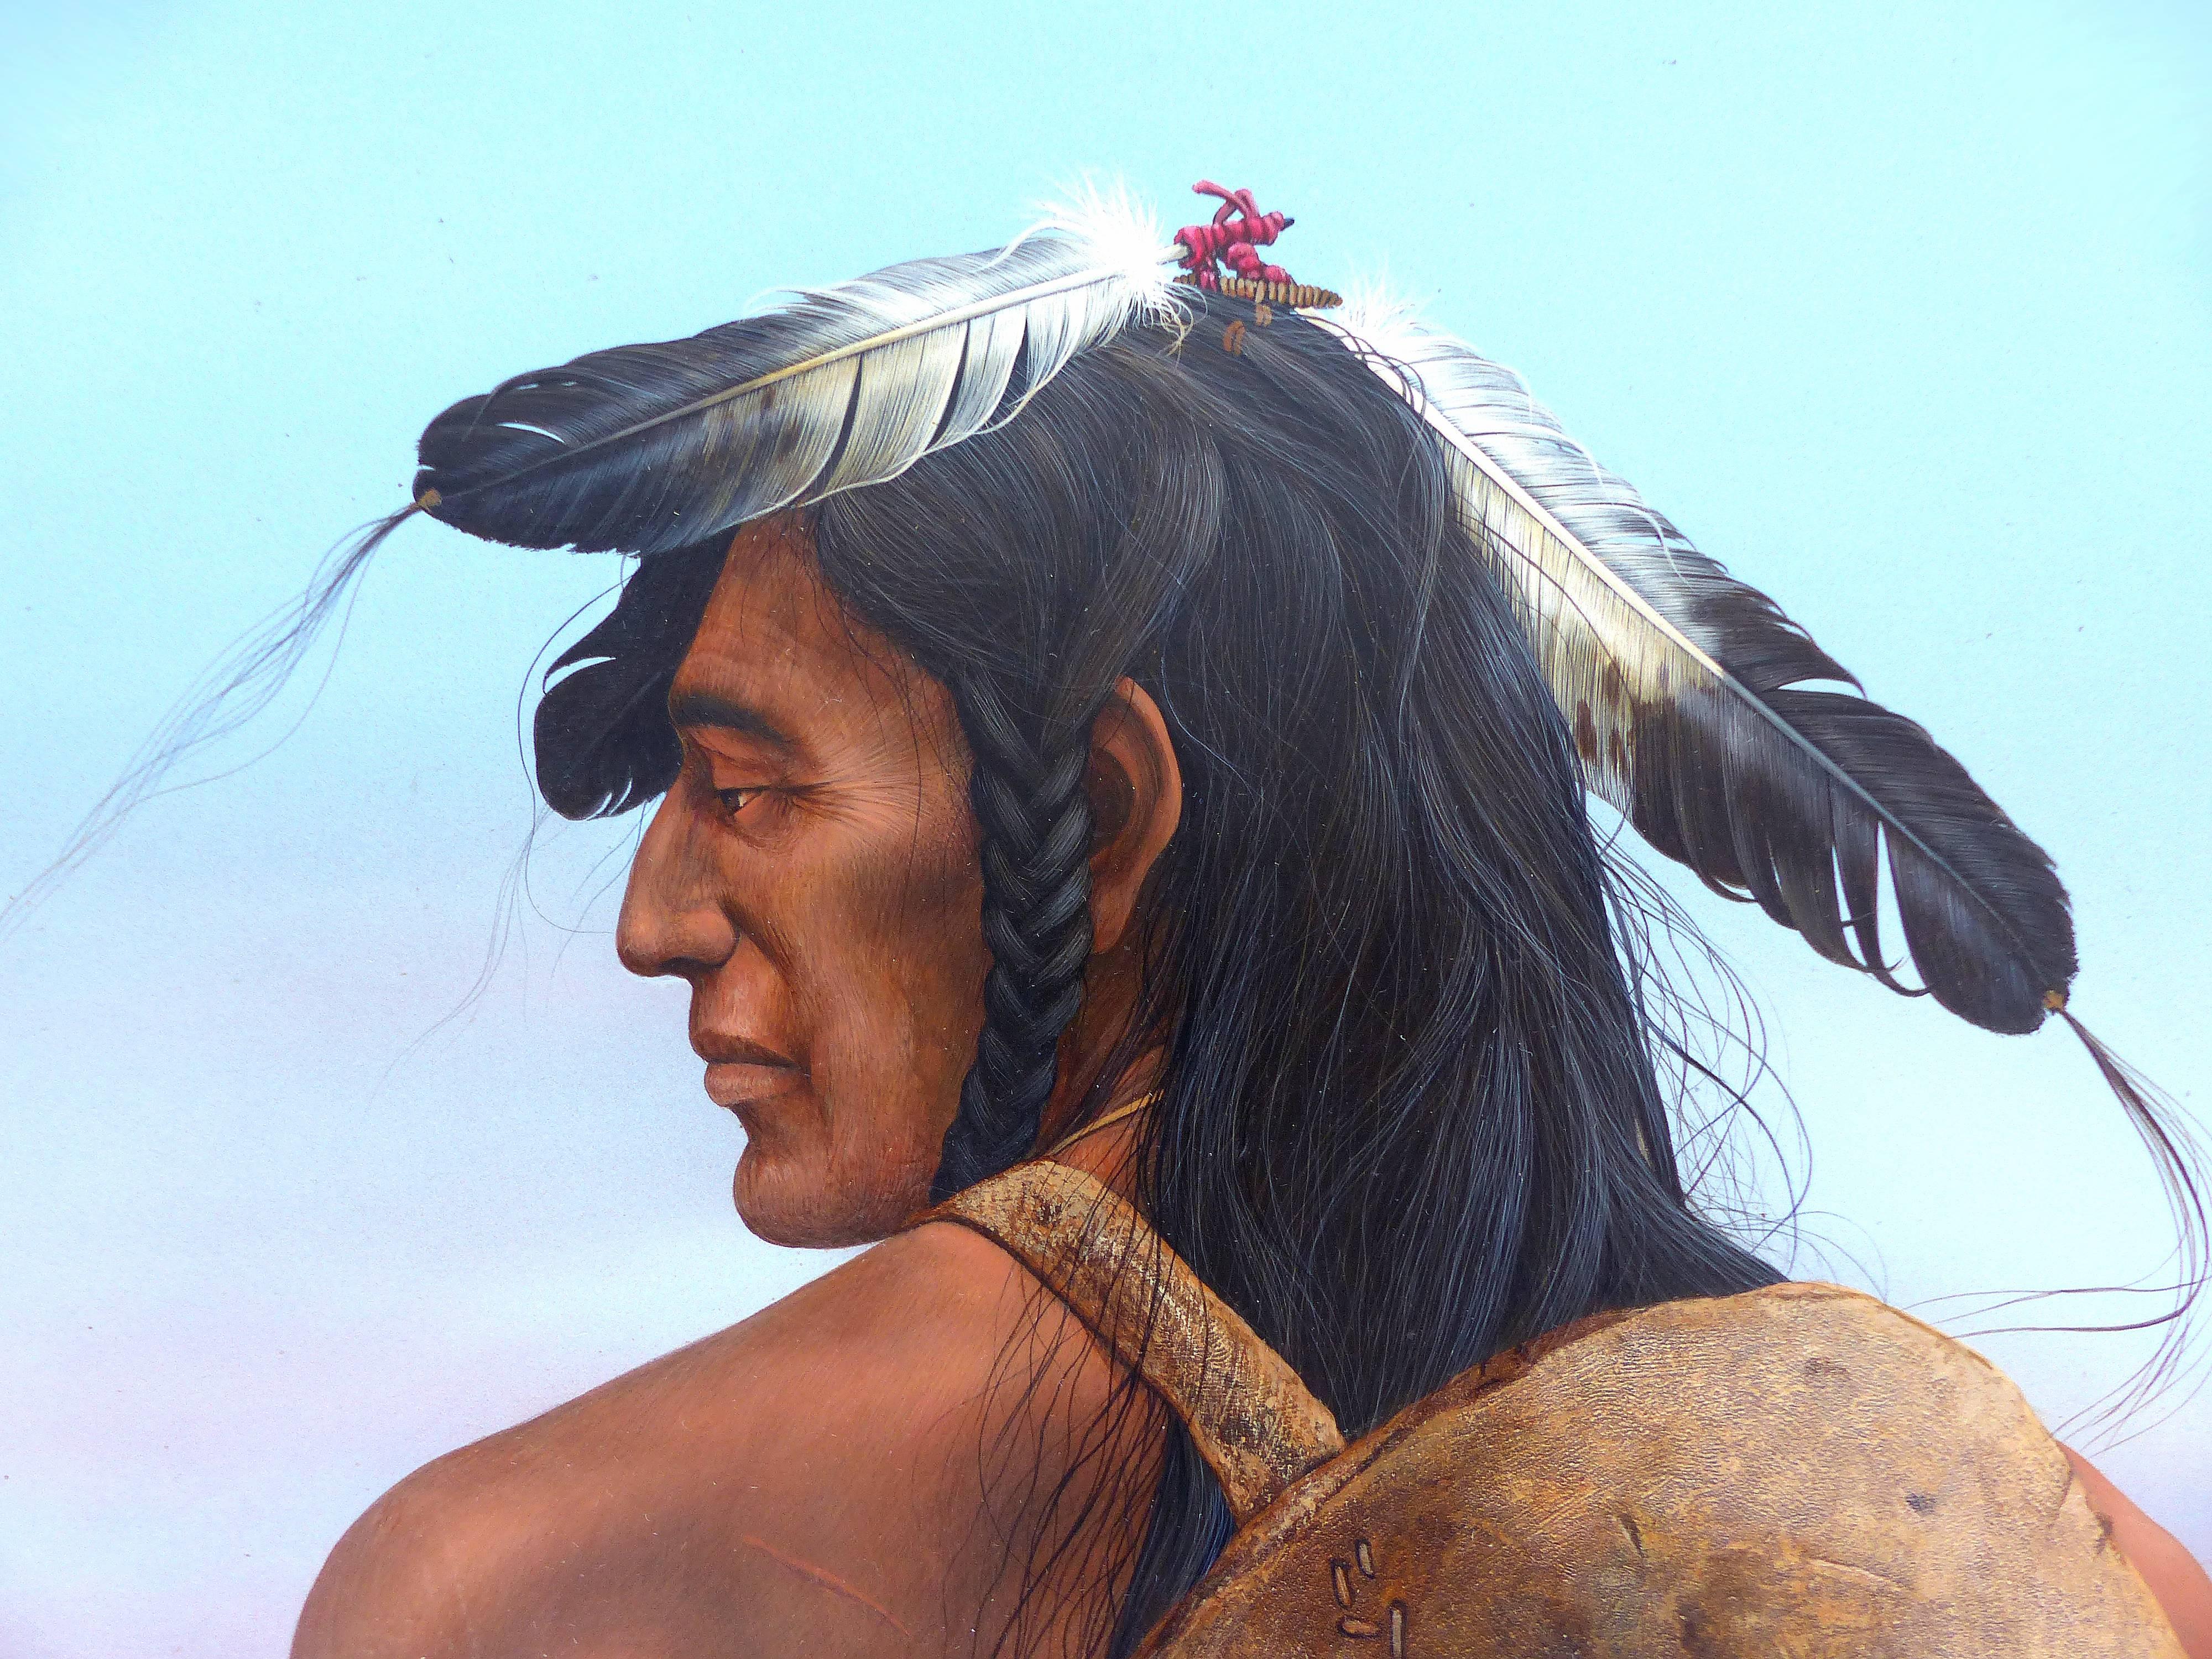 
A superb hyper-realism oil painting of two American Indians by Ron Owens, a well-known western and wildlife artist from Oklahoma City,. This work is painted with crisp photo-like detail. Signed Ron Owens lower right and dated 1982 with the